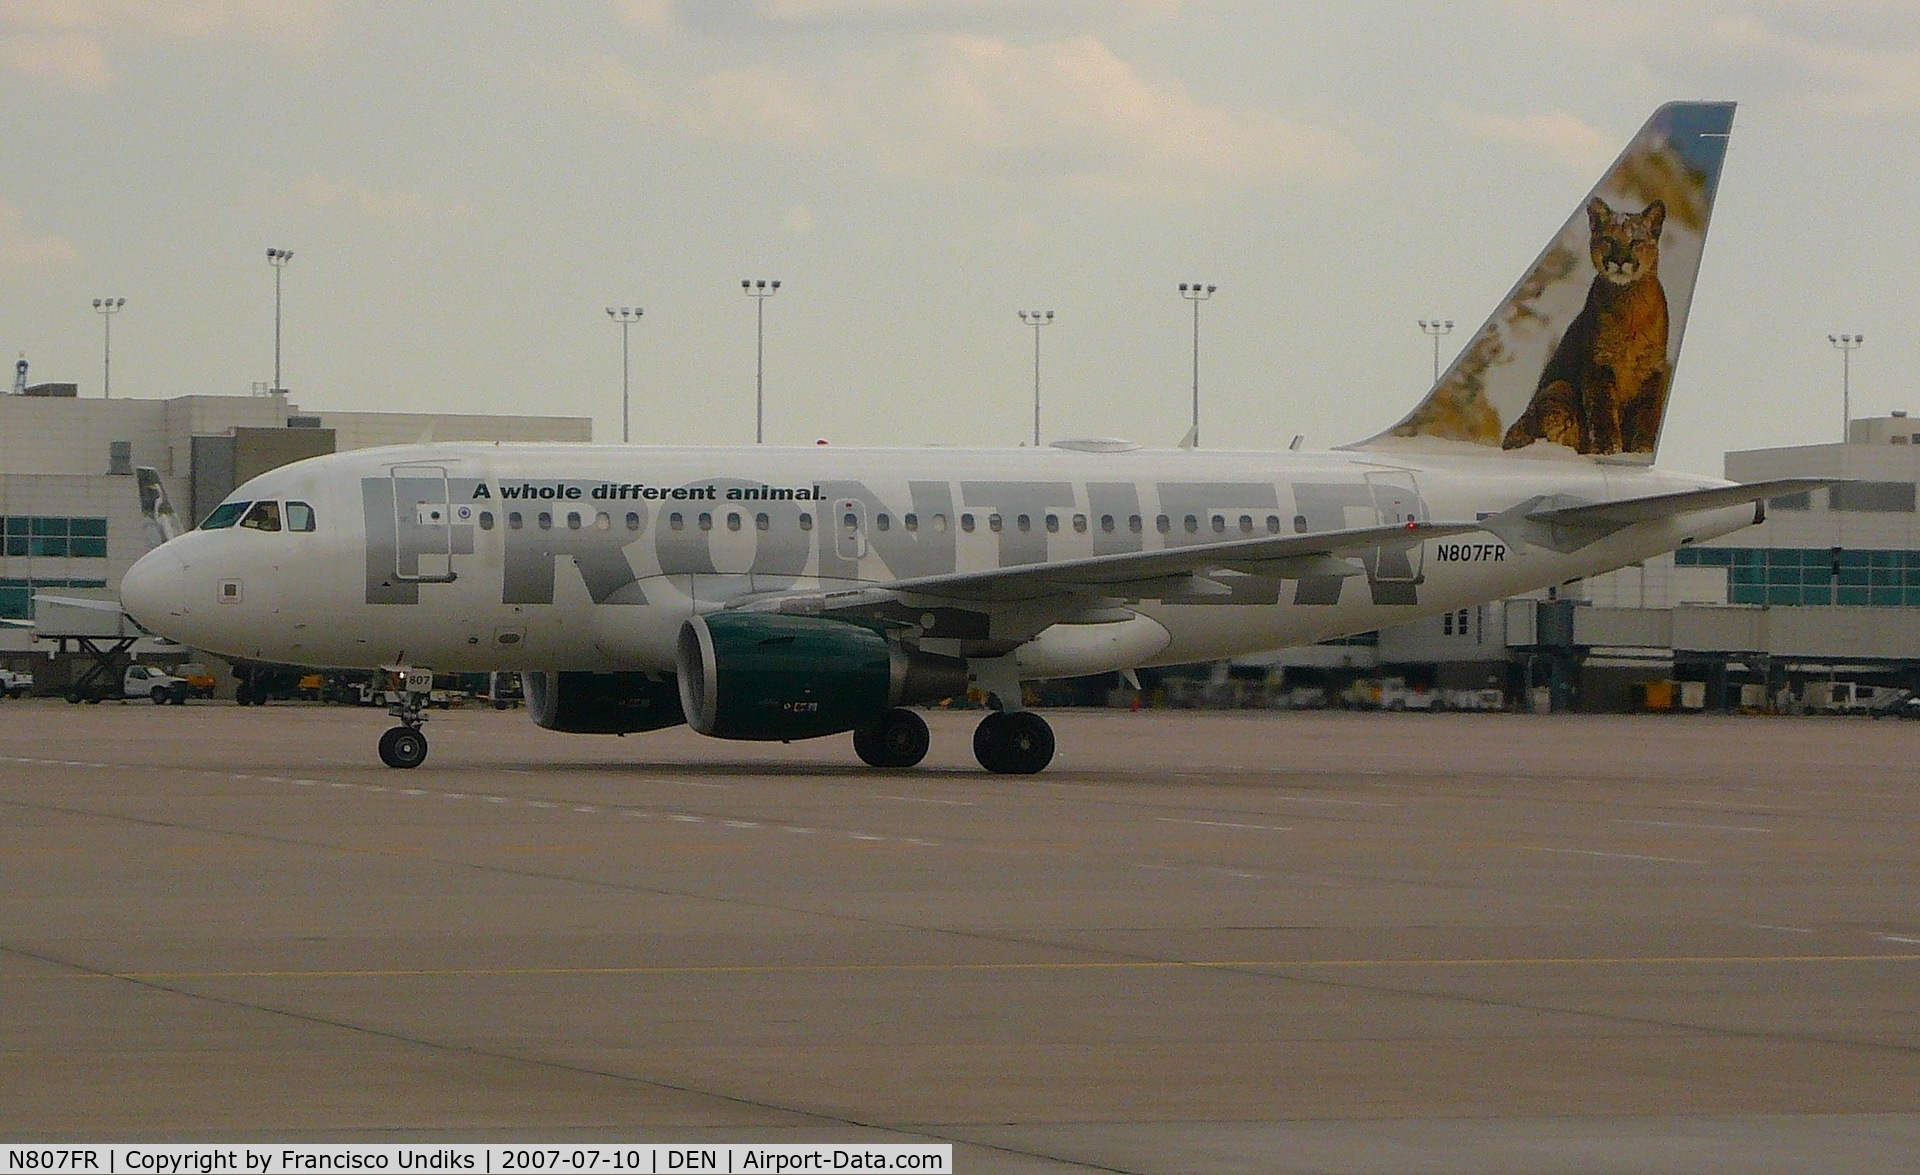 N807FR, 2004 Airbus A318-111 C/N 2276, Frontier Airlines Charlie the Cougar